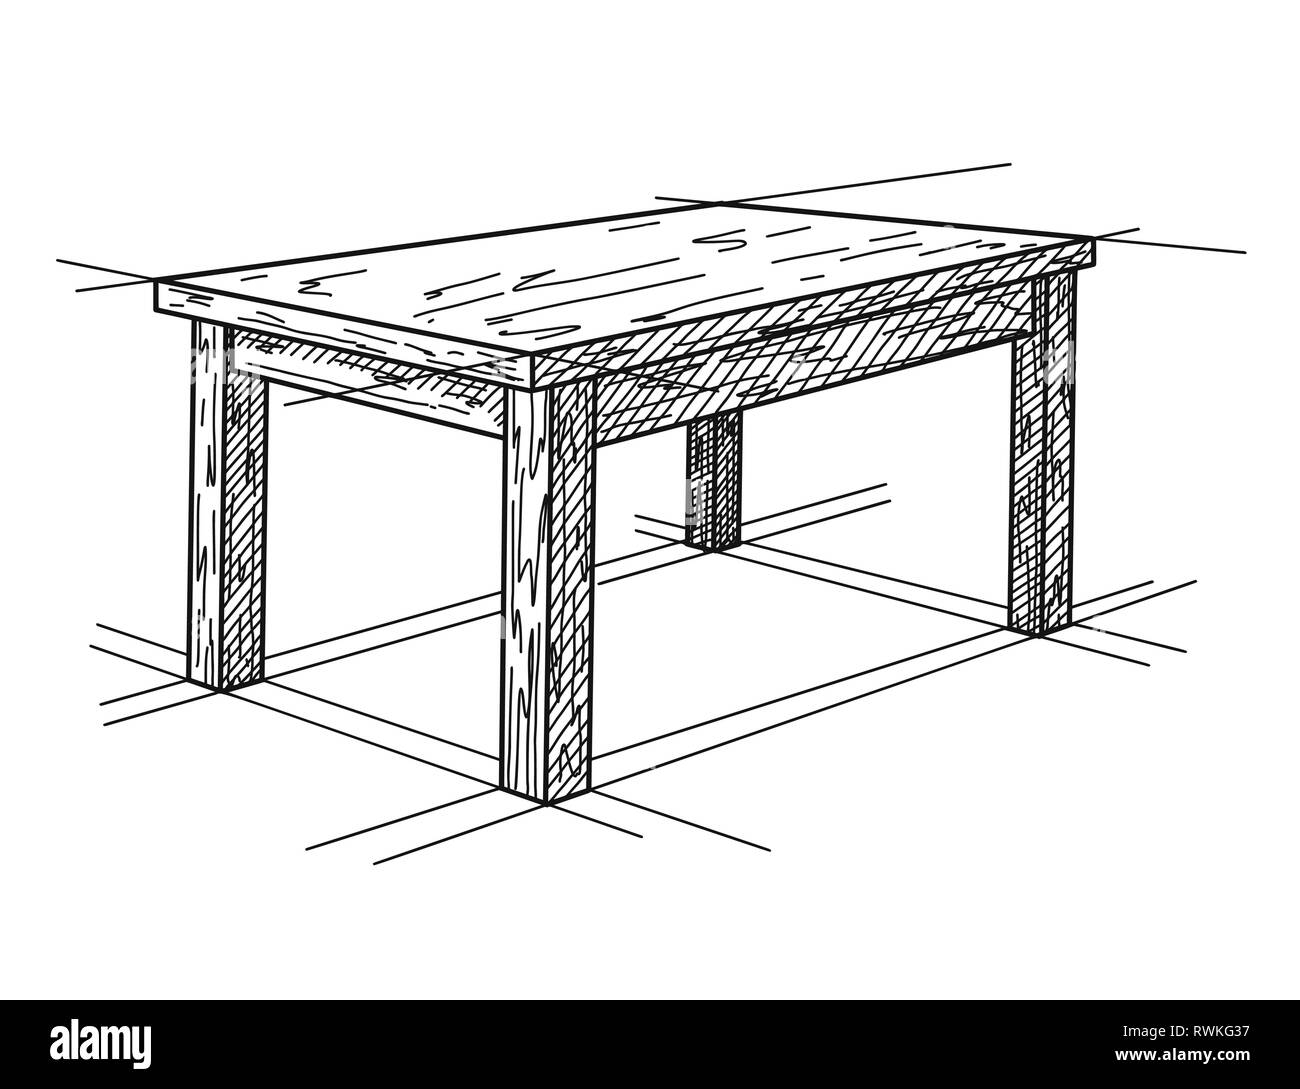 Realistic Sketch Of The Table In Perspective Vector Illustration